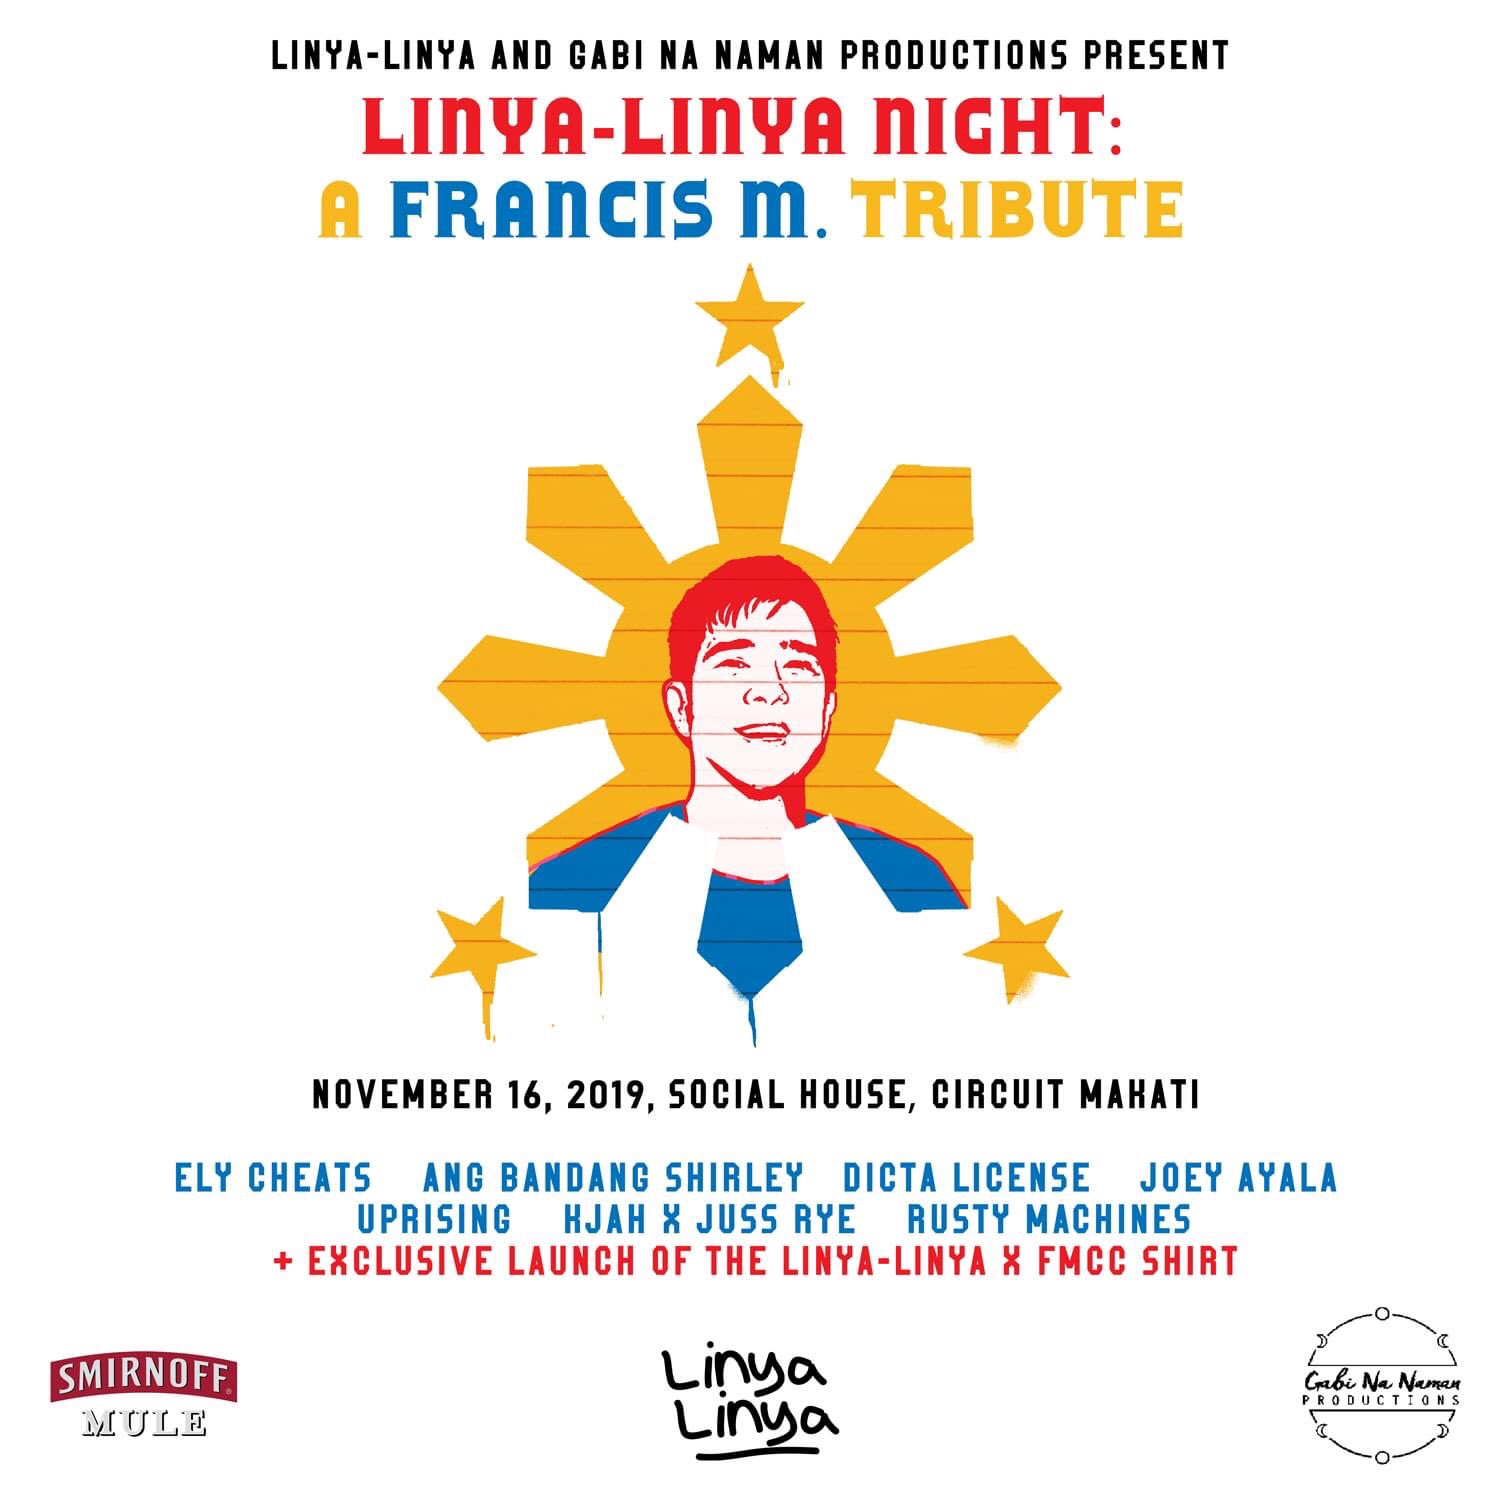  to The Linya-Linya Night: A Francis M Tribute   Happy birthday, Francis Magalona!  